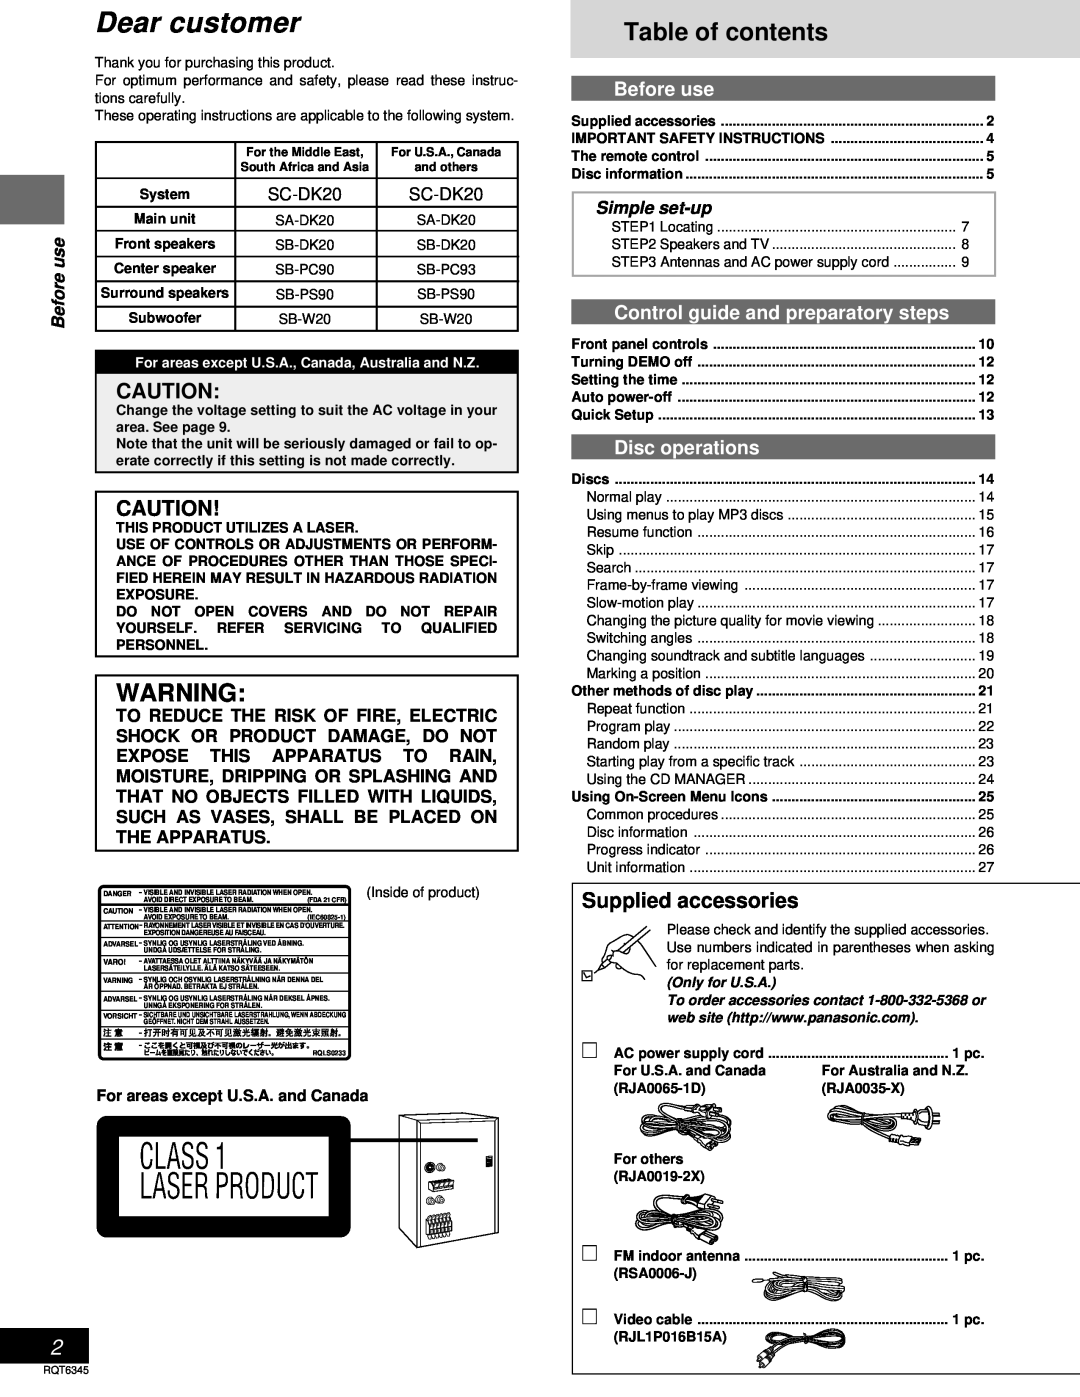 Panasonic SC-DK20 Table of contents, Supplied accessories, Before use, Control guide and preparatory steps, Simple set-up 